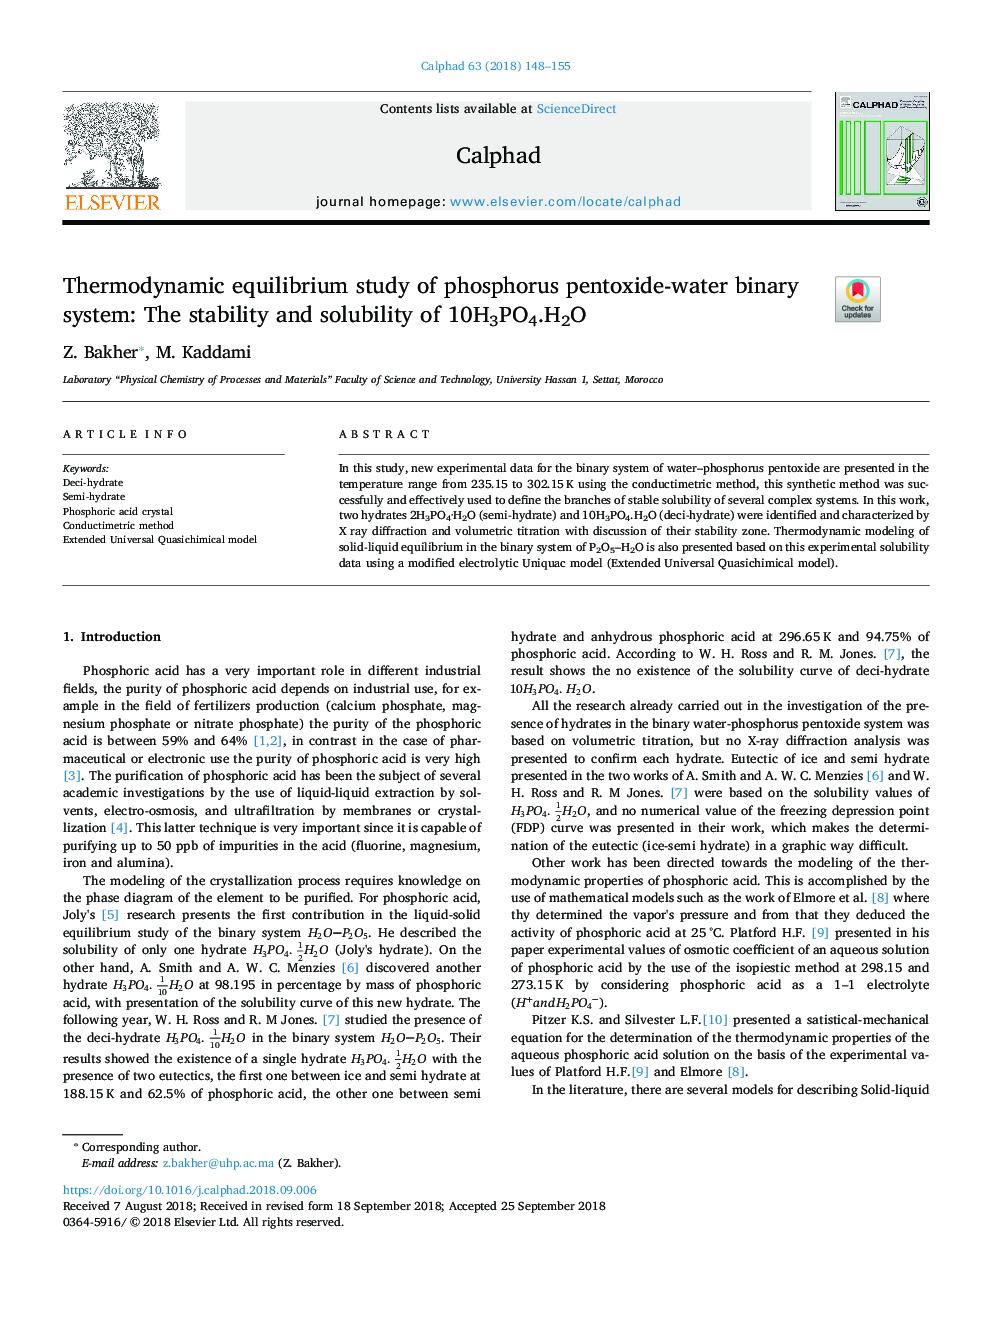 Thermodynamic equilibrium study of phosphorus pentoxide-water binary system: The stability and solubility of 10H3PO4.H2O